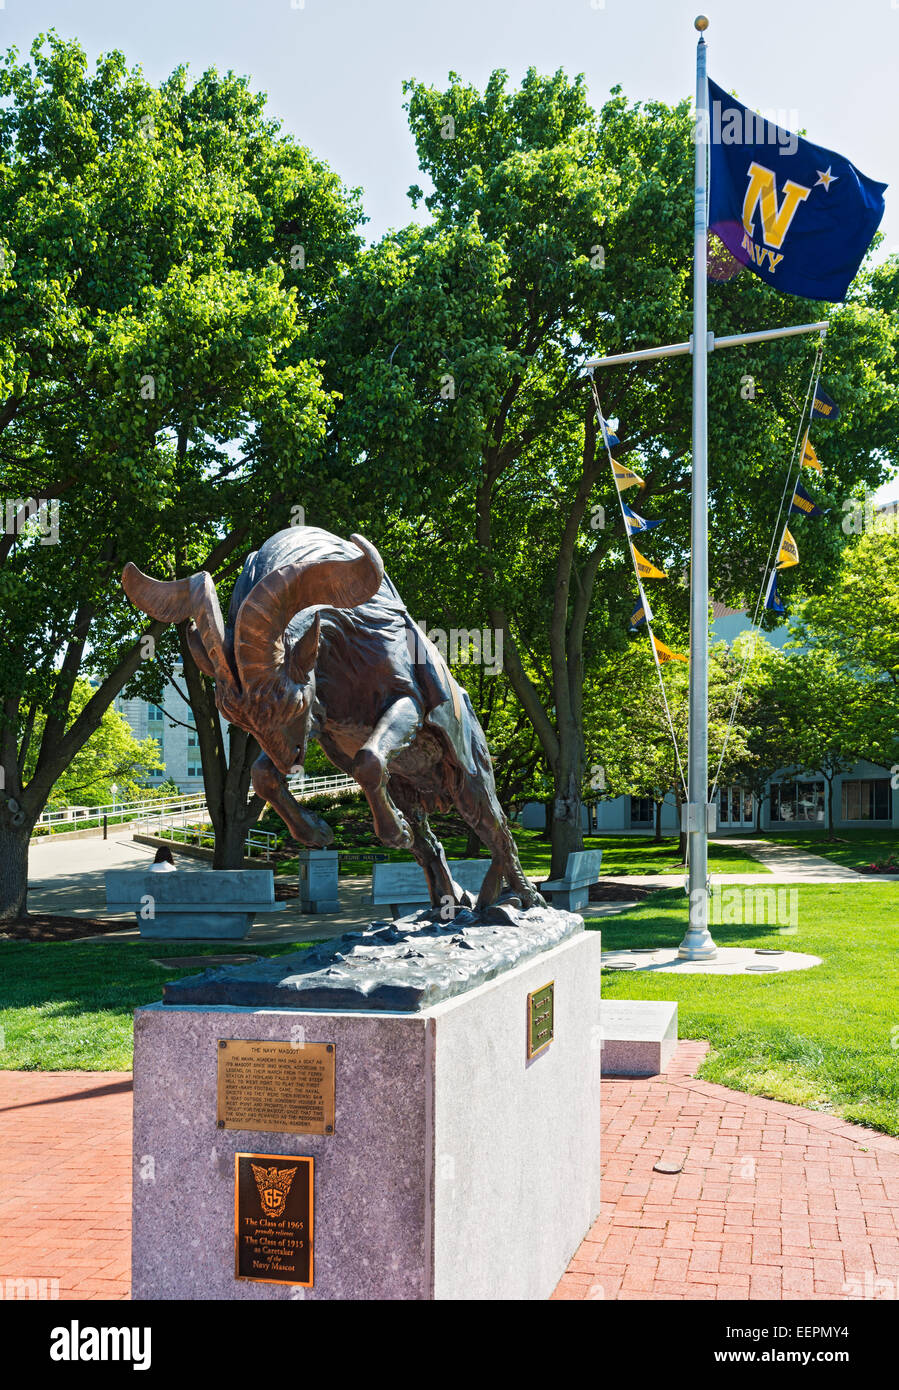 Maryland, Annapolis, United States Naval Academy, mascot 'Bill the Goat' sculpture Stock Photo